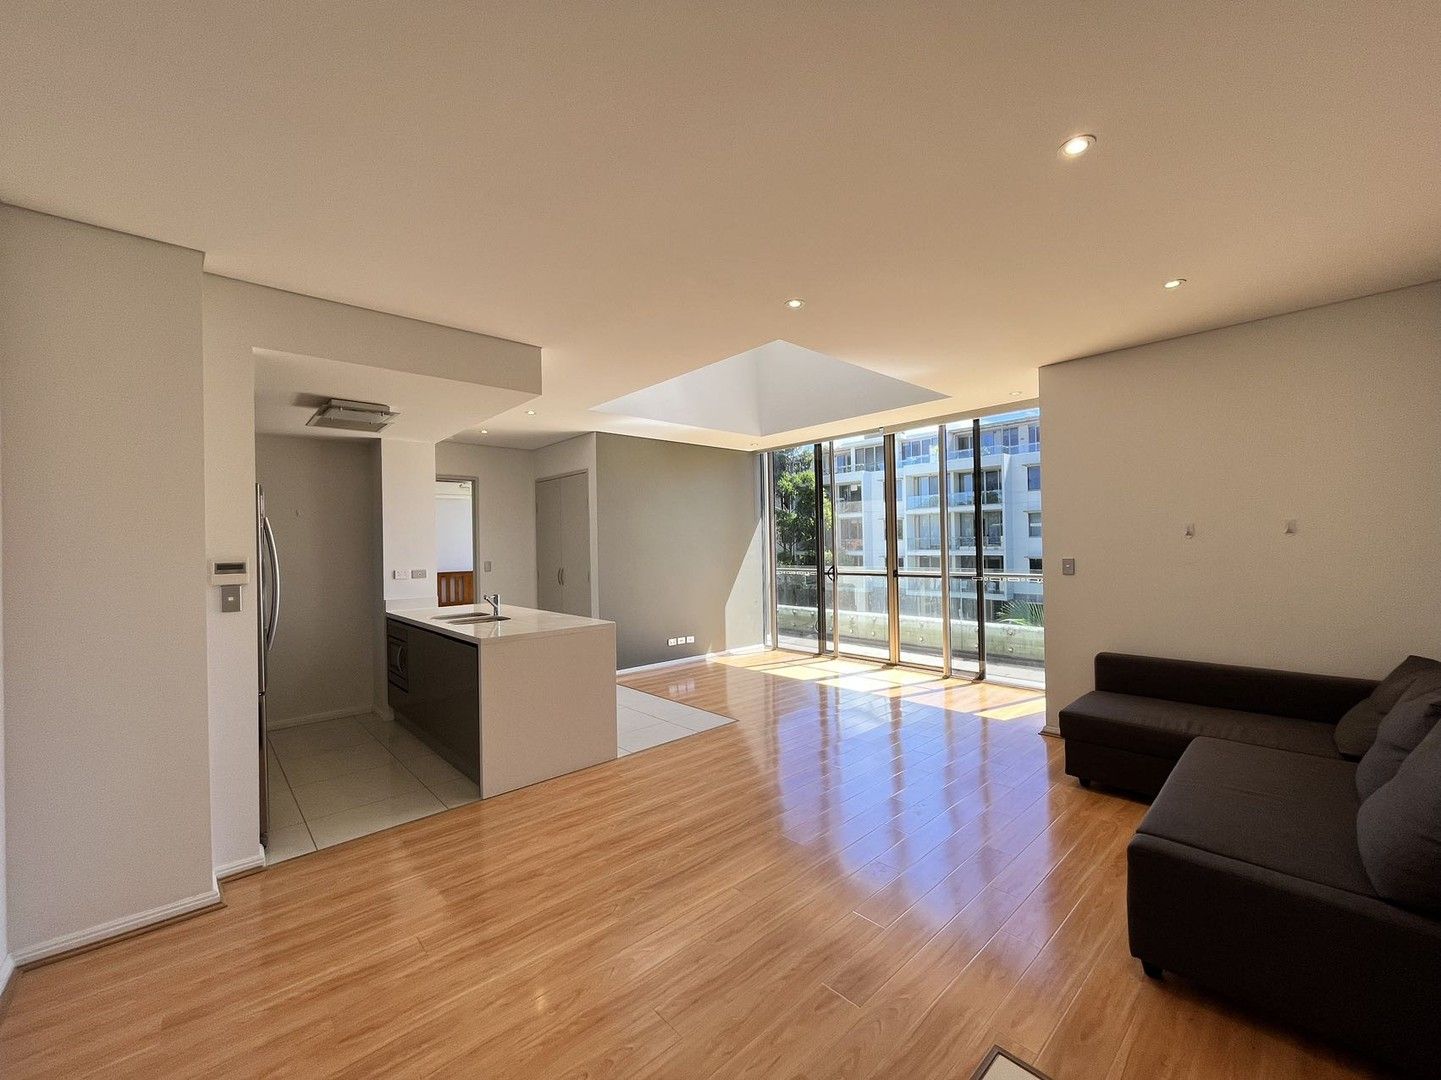 2 bedrooms Apartment / Unit / Flat in Level 3, 375/132 Killeaton Street ST IVES NSW, 2075